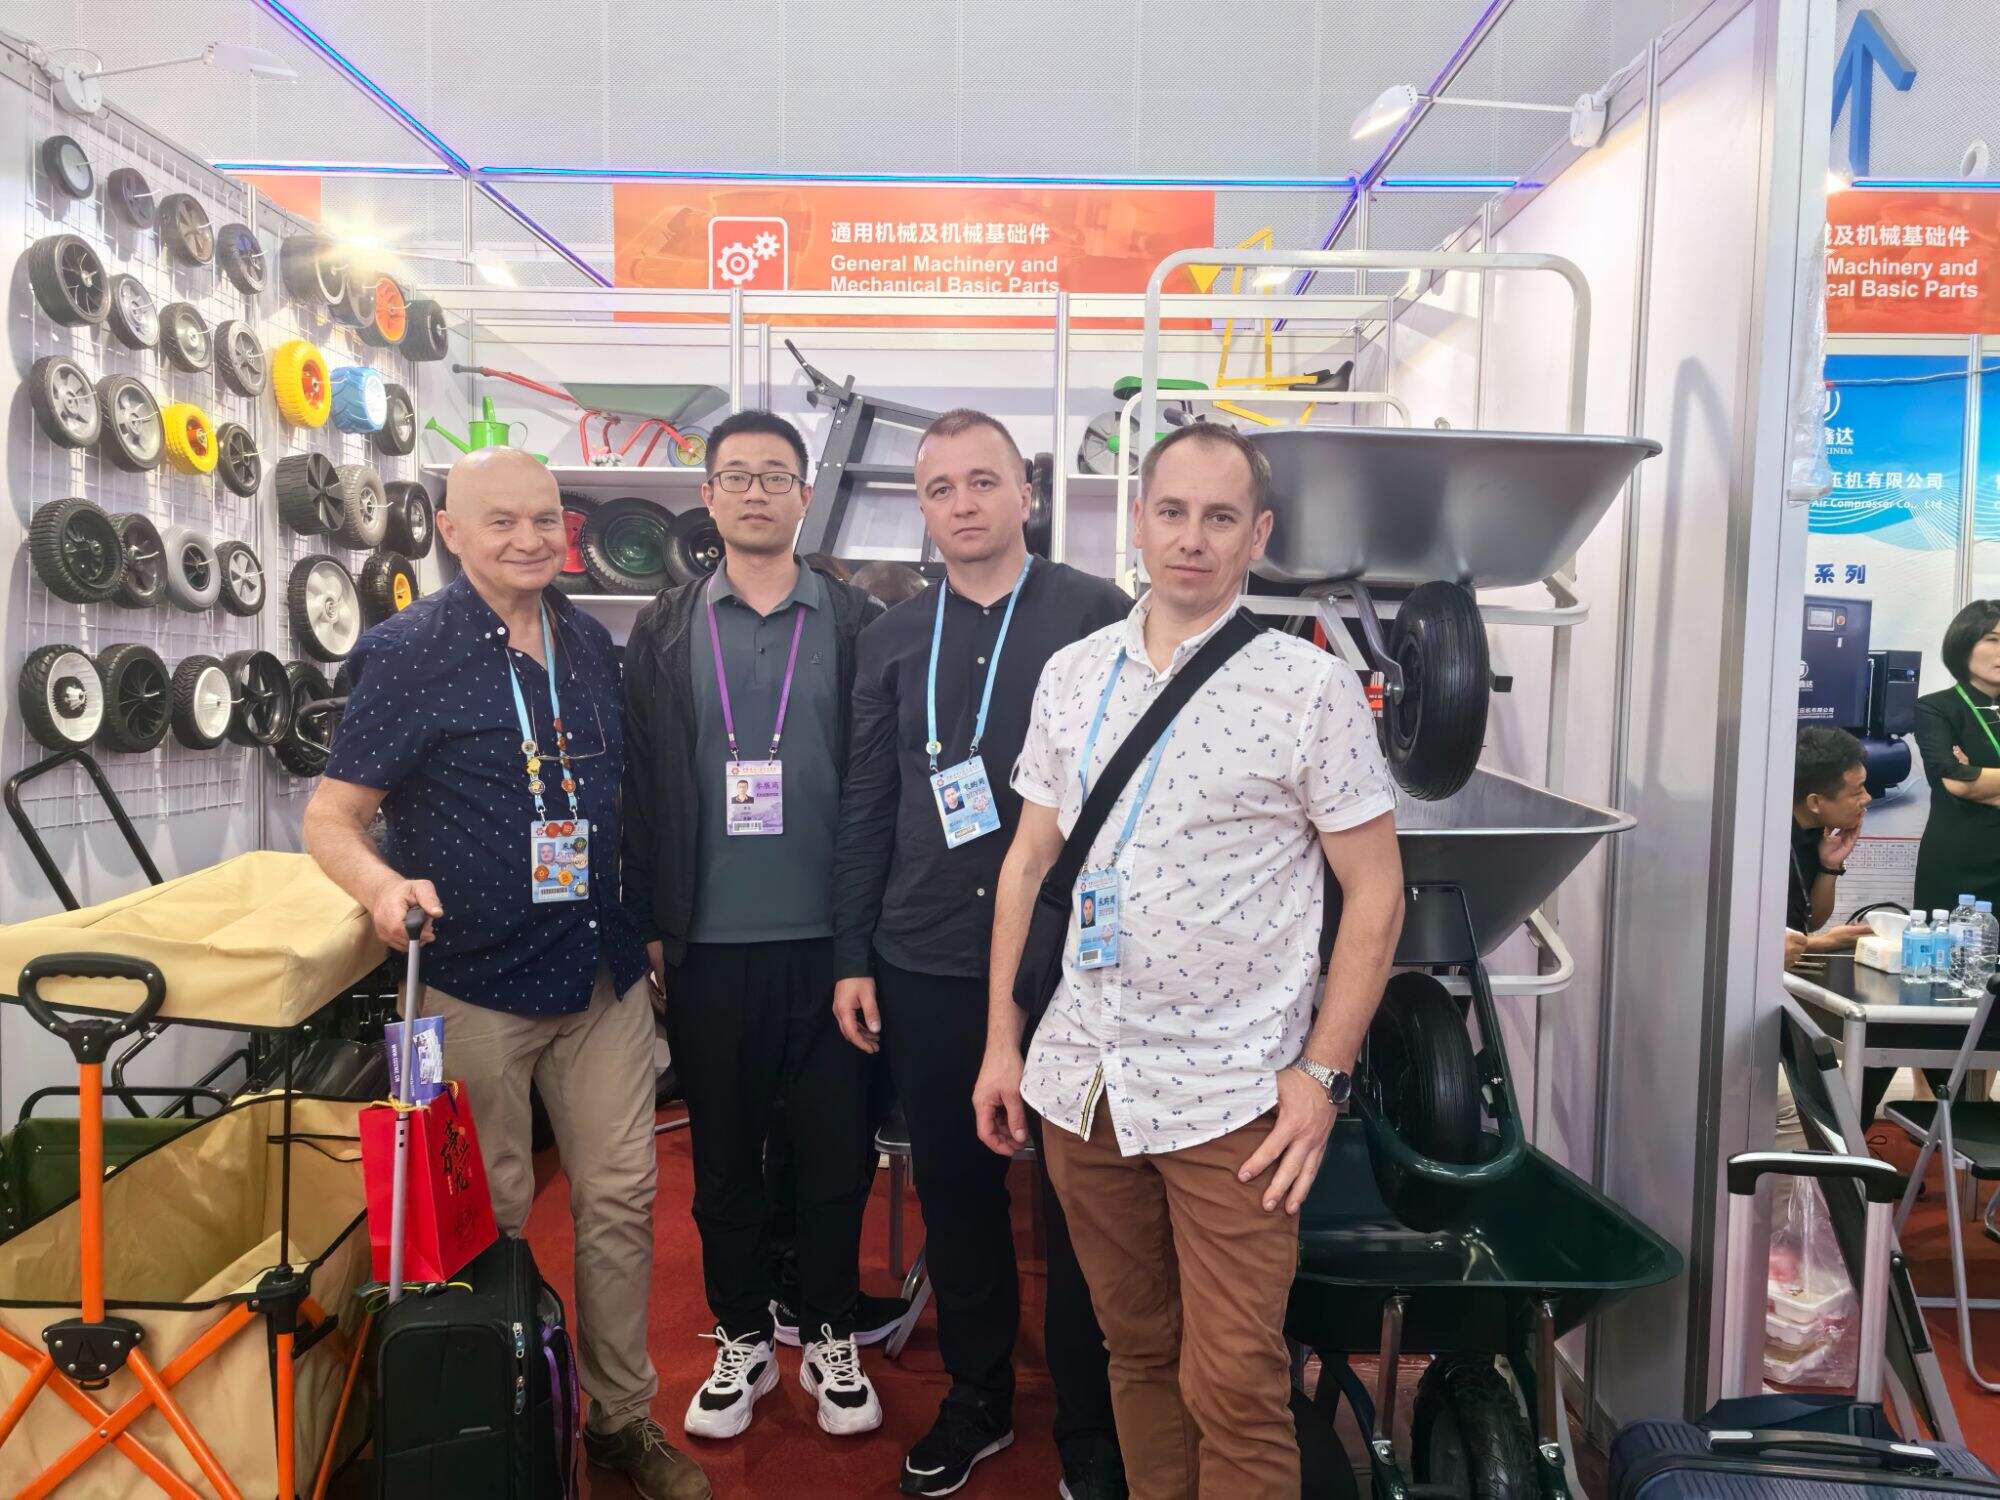 At the 135th Canton Fair, Giant Industry company made an appearance once again, showcasing its strong corporate strength and innovative technology